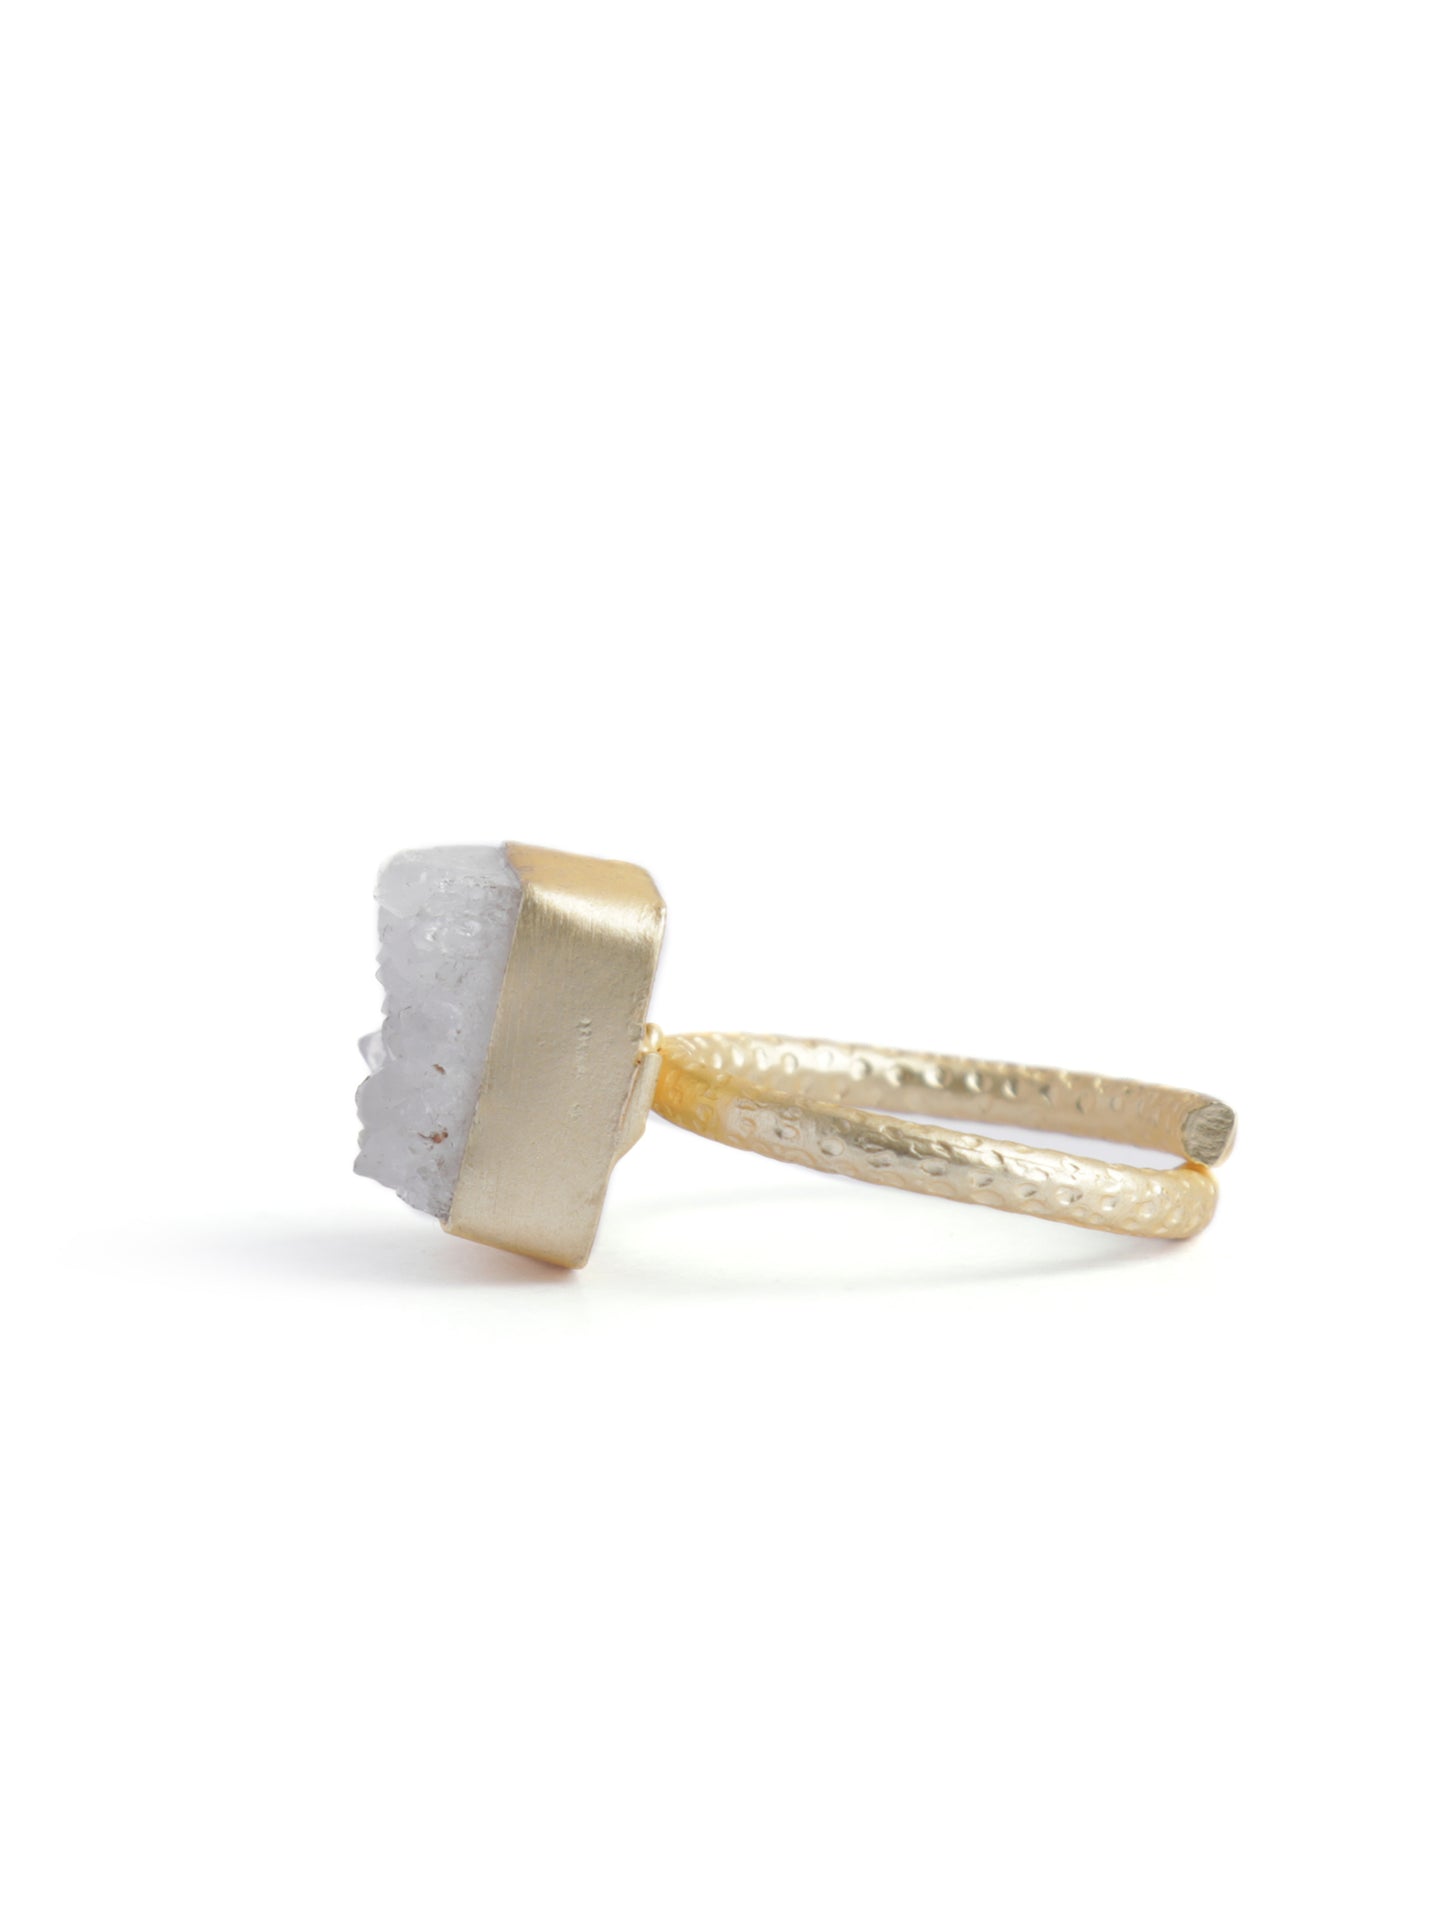 The White Agate Druzy Ring